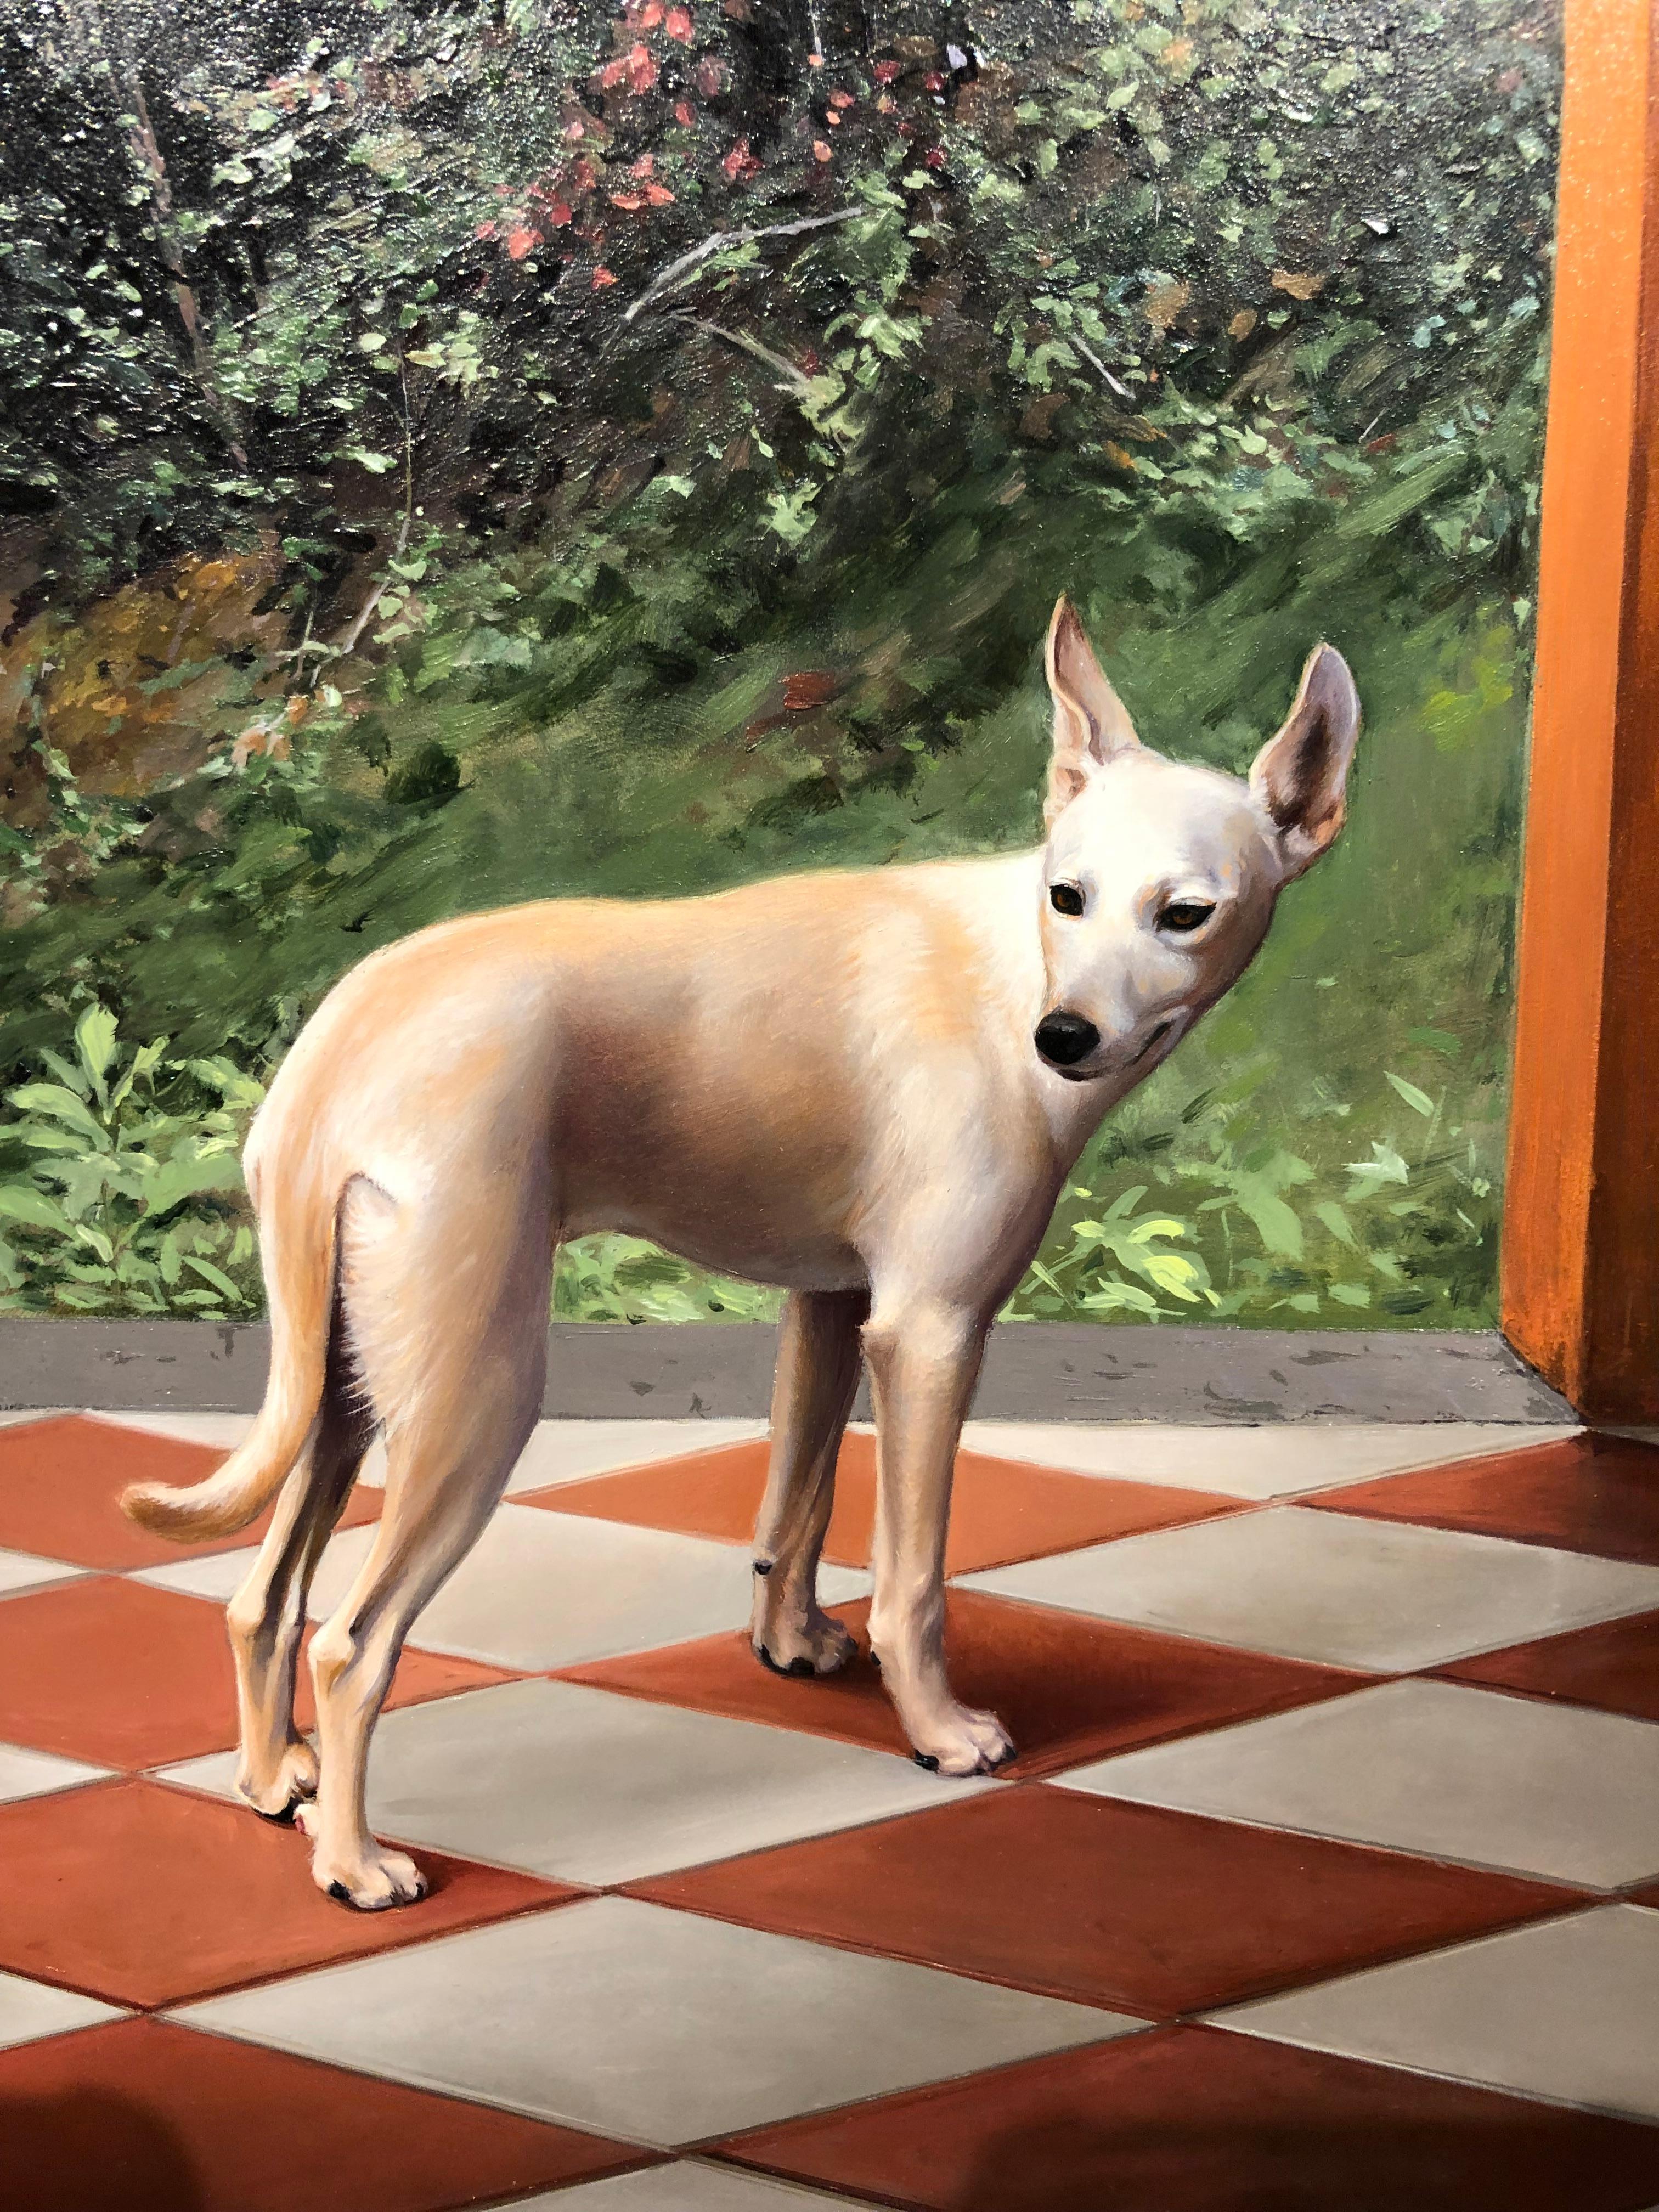 Ibizan Fall - Terra Cotta Colored Architectural Walls w/ Wooded Landscape & Dog – Painting von Carol Pylant